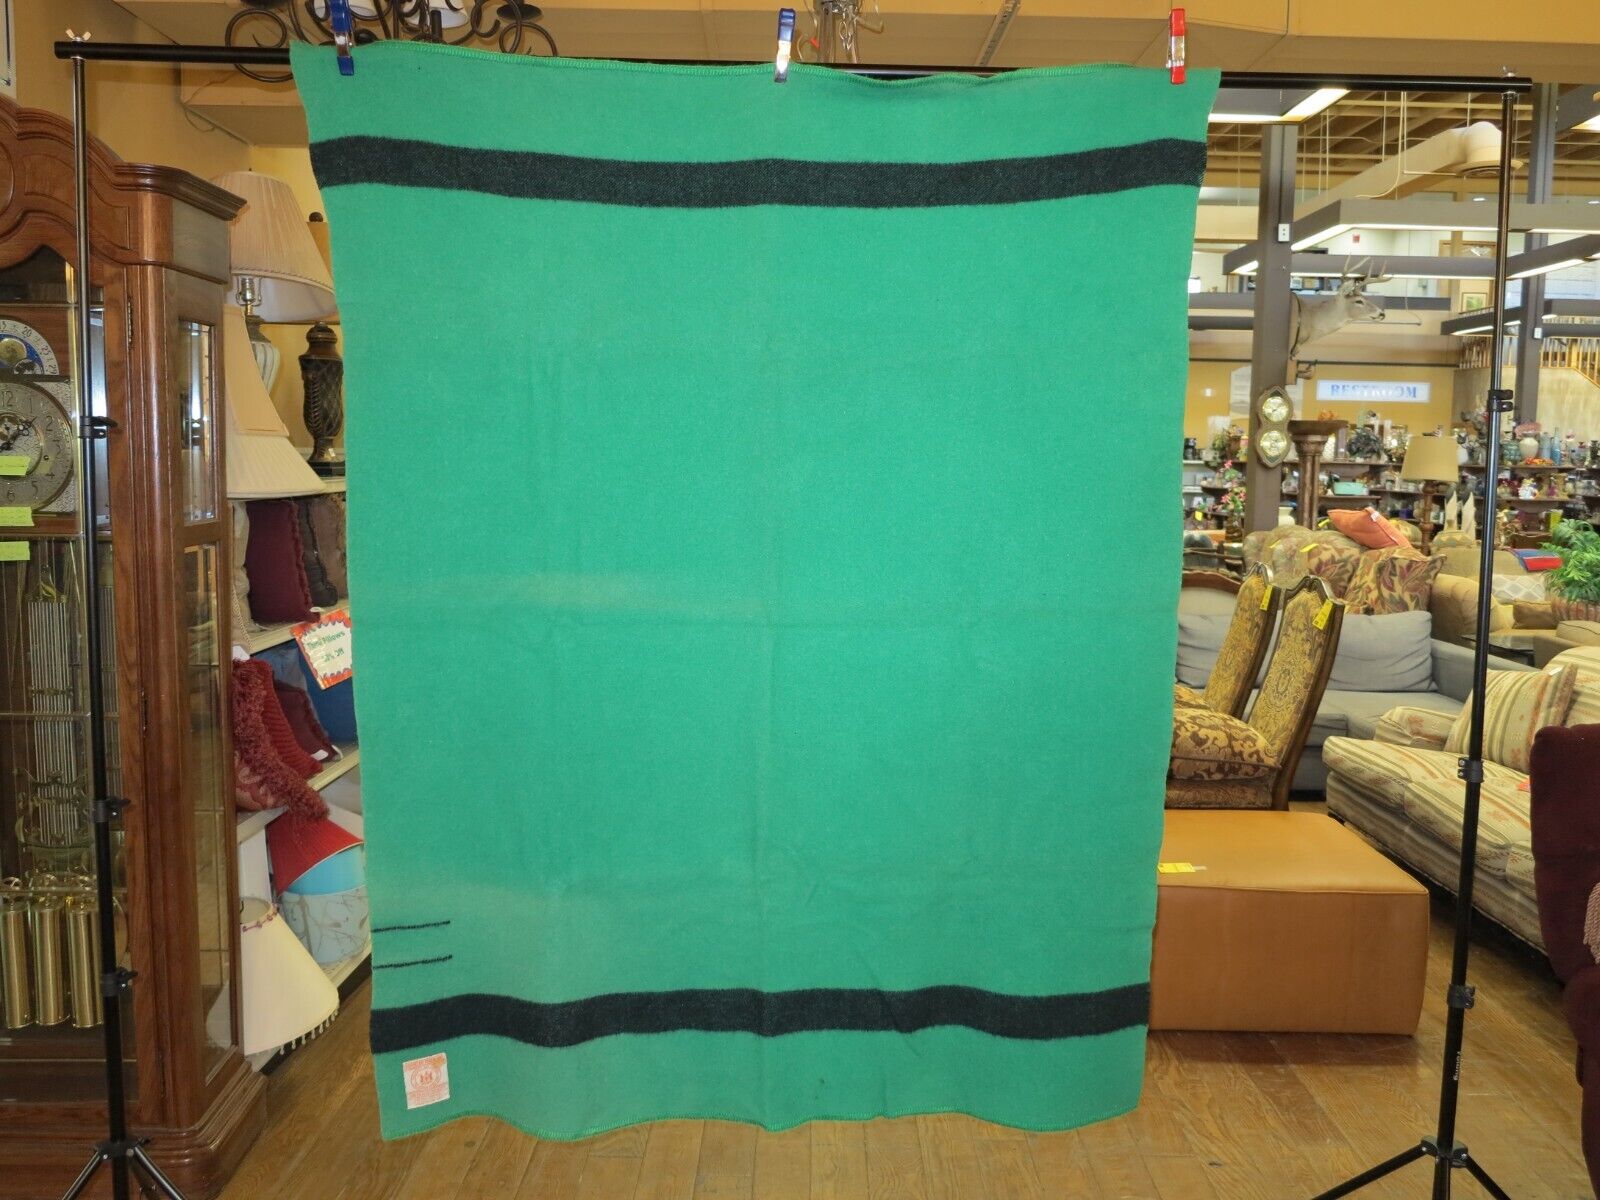 Hudson's Bay Company 2 Point 100% Wool Blanket - Green and Black - 1930s